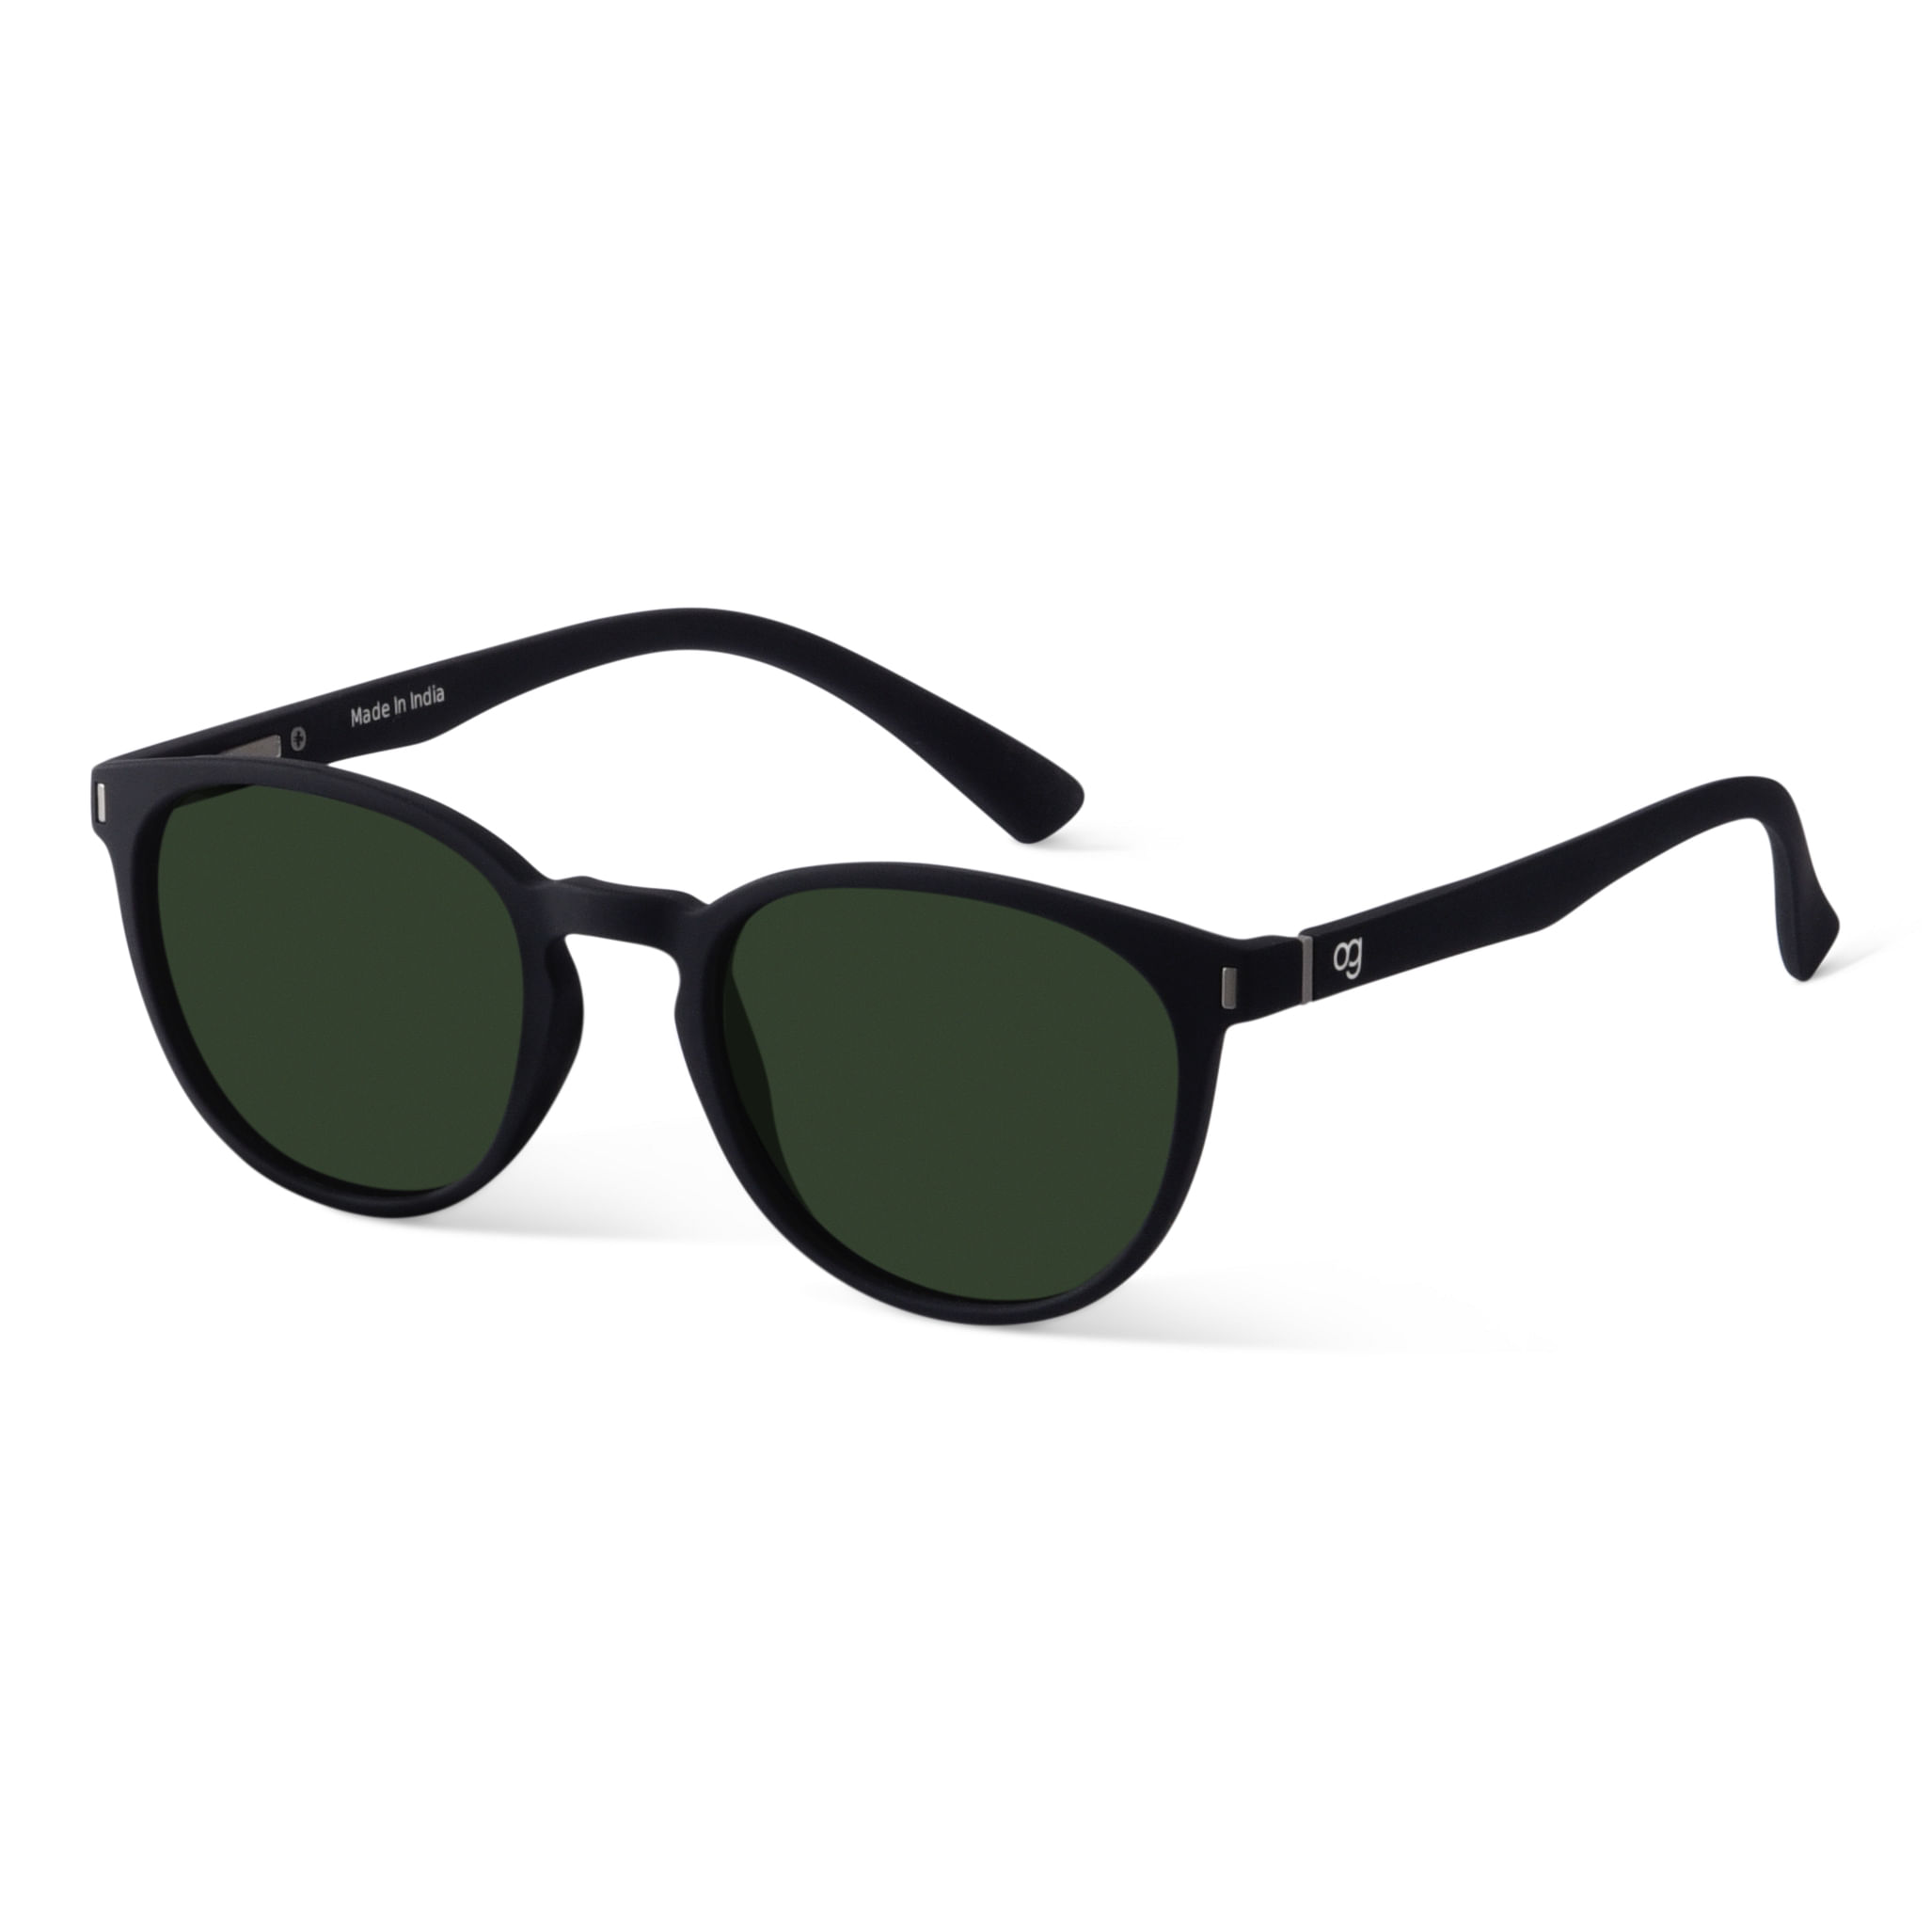 Sunglasses by Size - Buy Sunglasses by Size Online At Best Price In India |  Lenskart